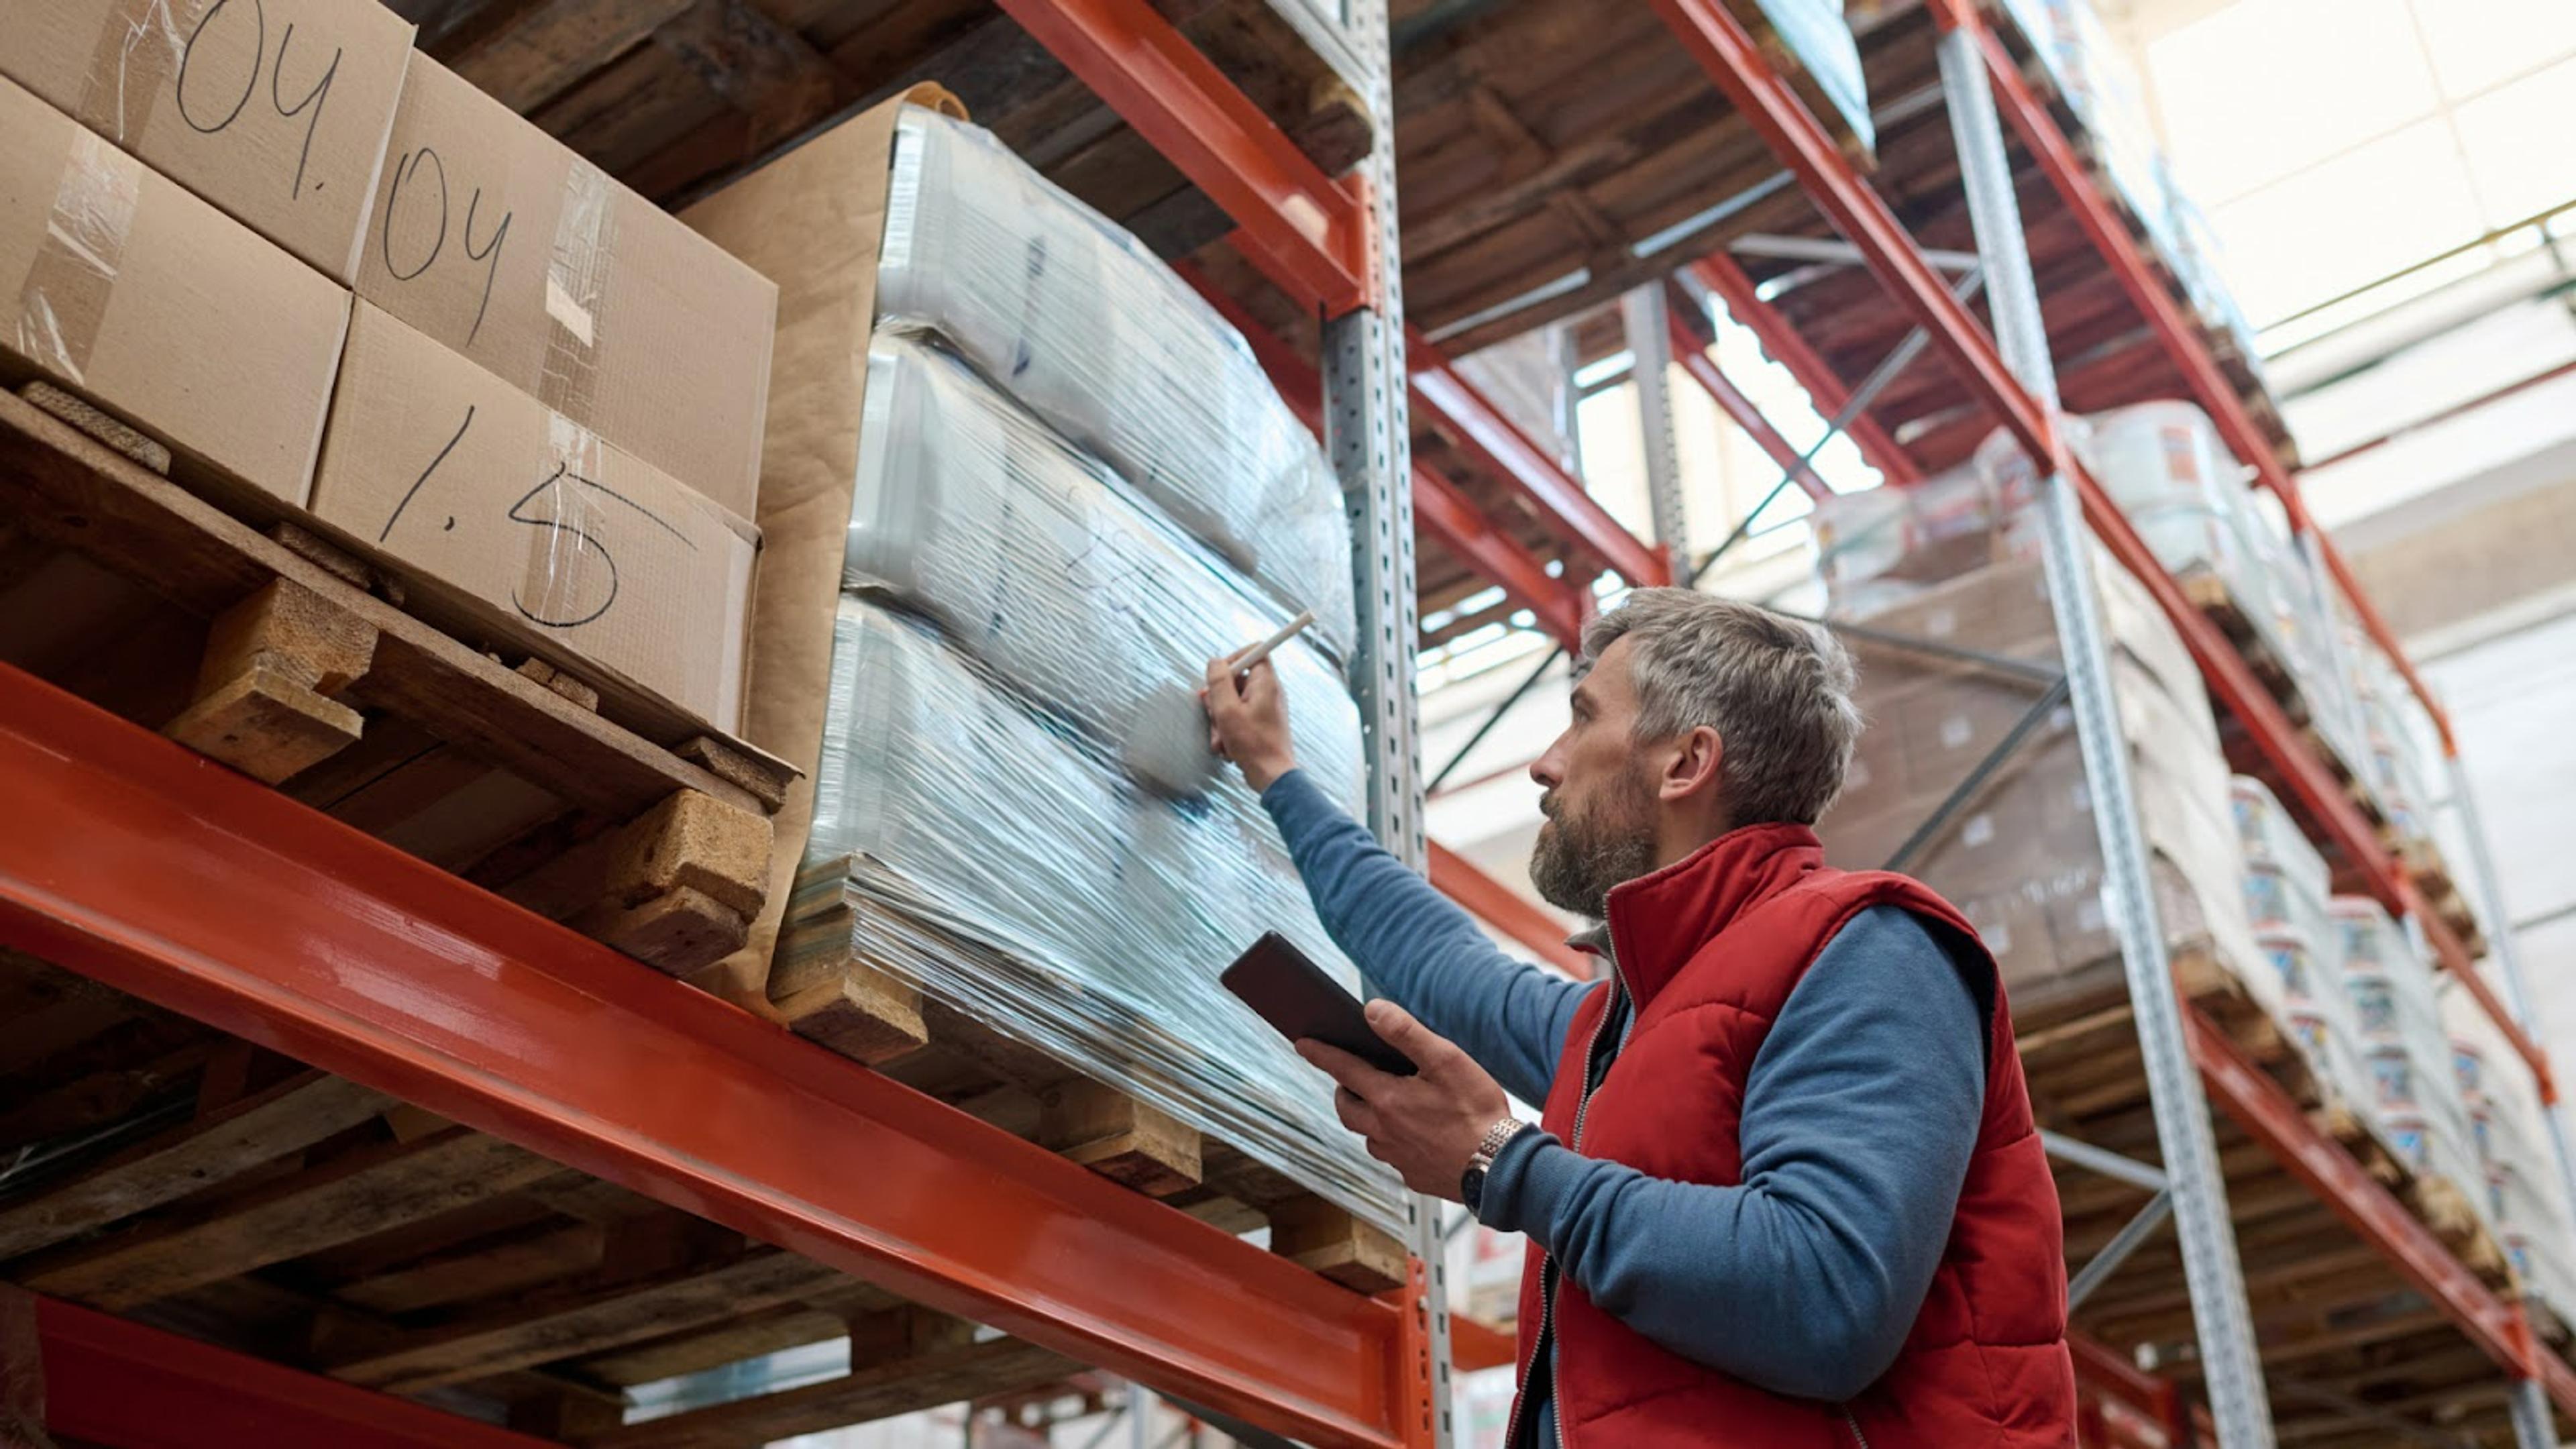 Why Are Fulfillment Centers Important?